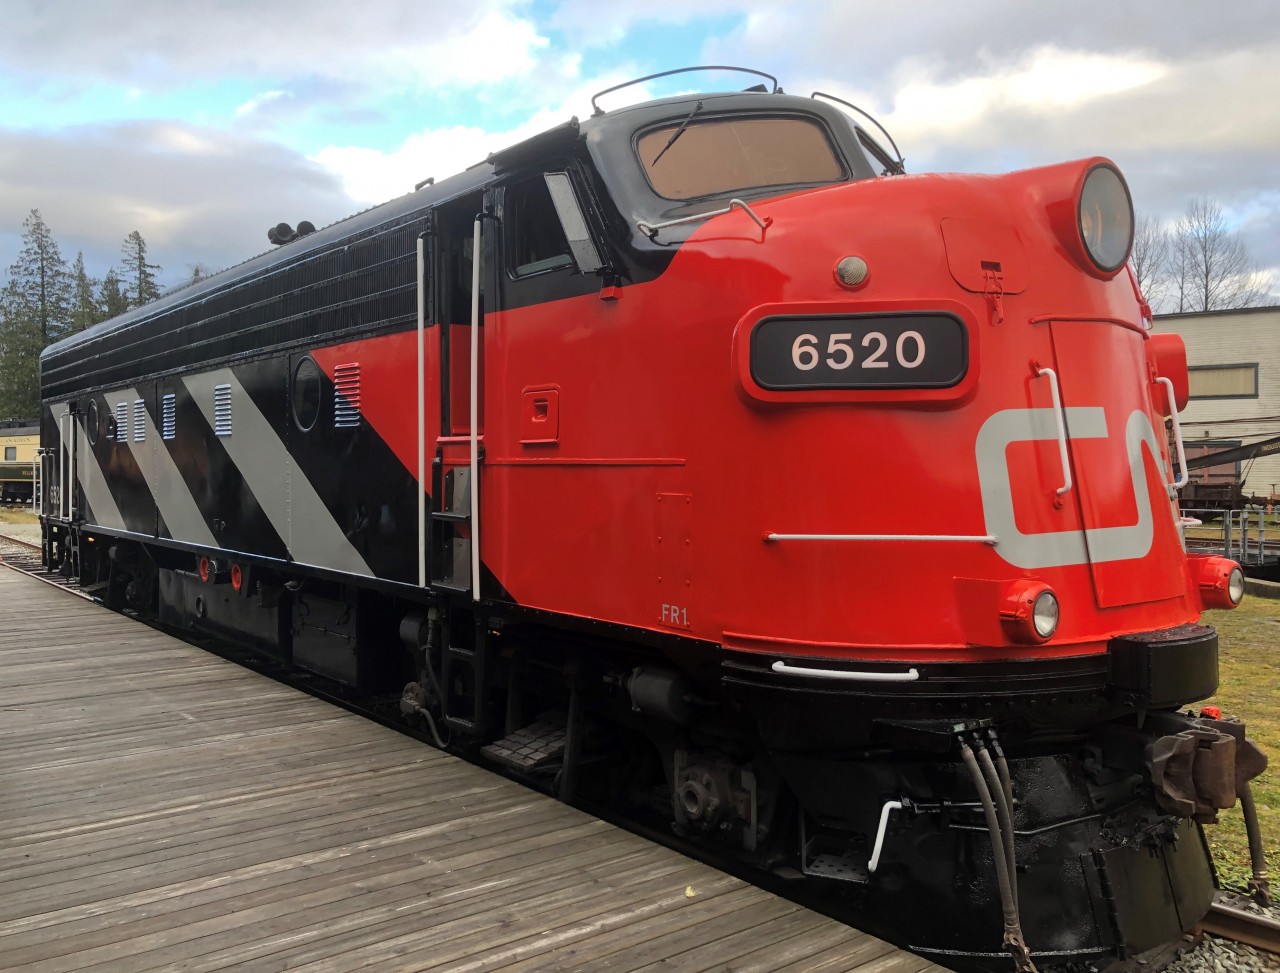 Recently repainted in the bold and striking 1961 CN scheme that it would wear for most of its career in passenger service, CN 6520 was revealed to the public in Squamish in November 2019, after several years of restoration and upgrades. Geared for a top speed of 89mph, CN 6520 was used to pull the finest regional and transcontinental trains of its time. It finished its career painted in VIA colours until it served again in CN Green and Gold in Ontario at the Waterloo & St. Jacobs Railway. It runs very well and will be one of our prime pieces of motive power for Dinner Trains and other special events.